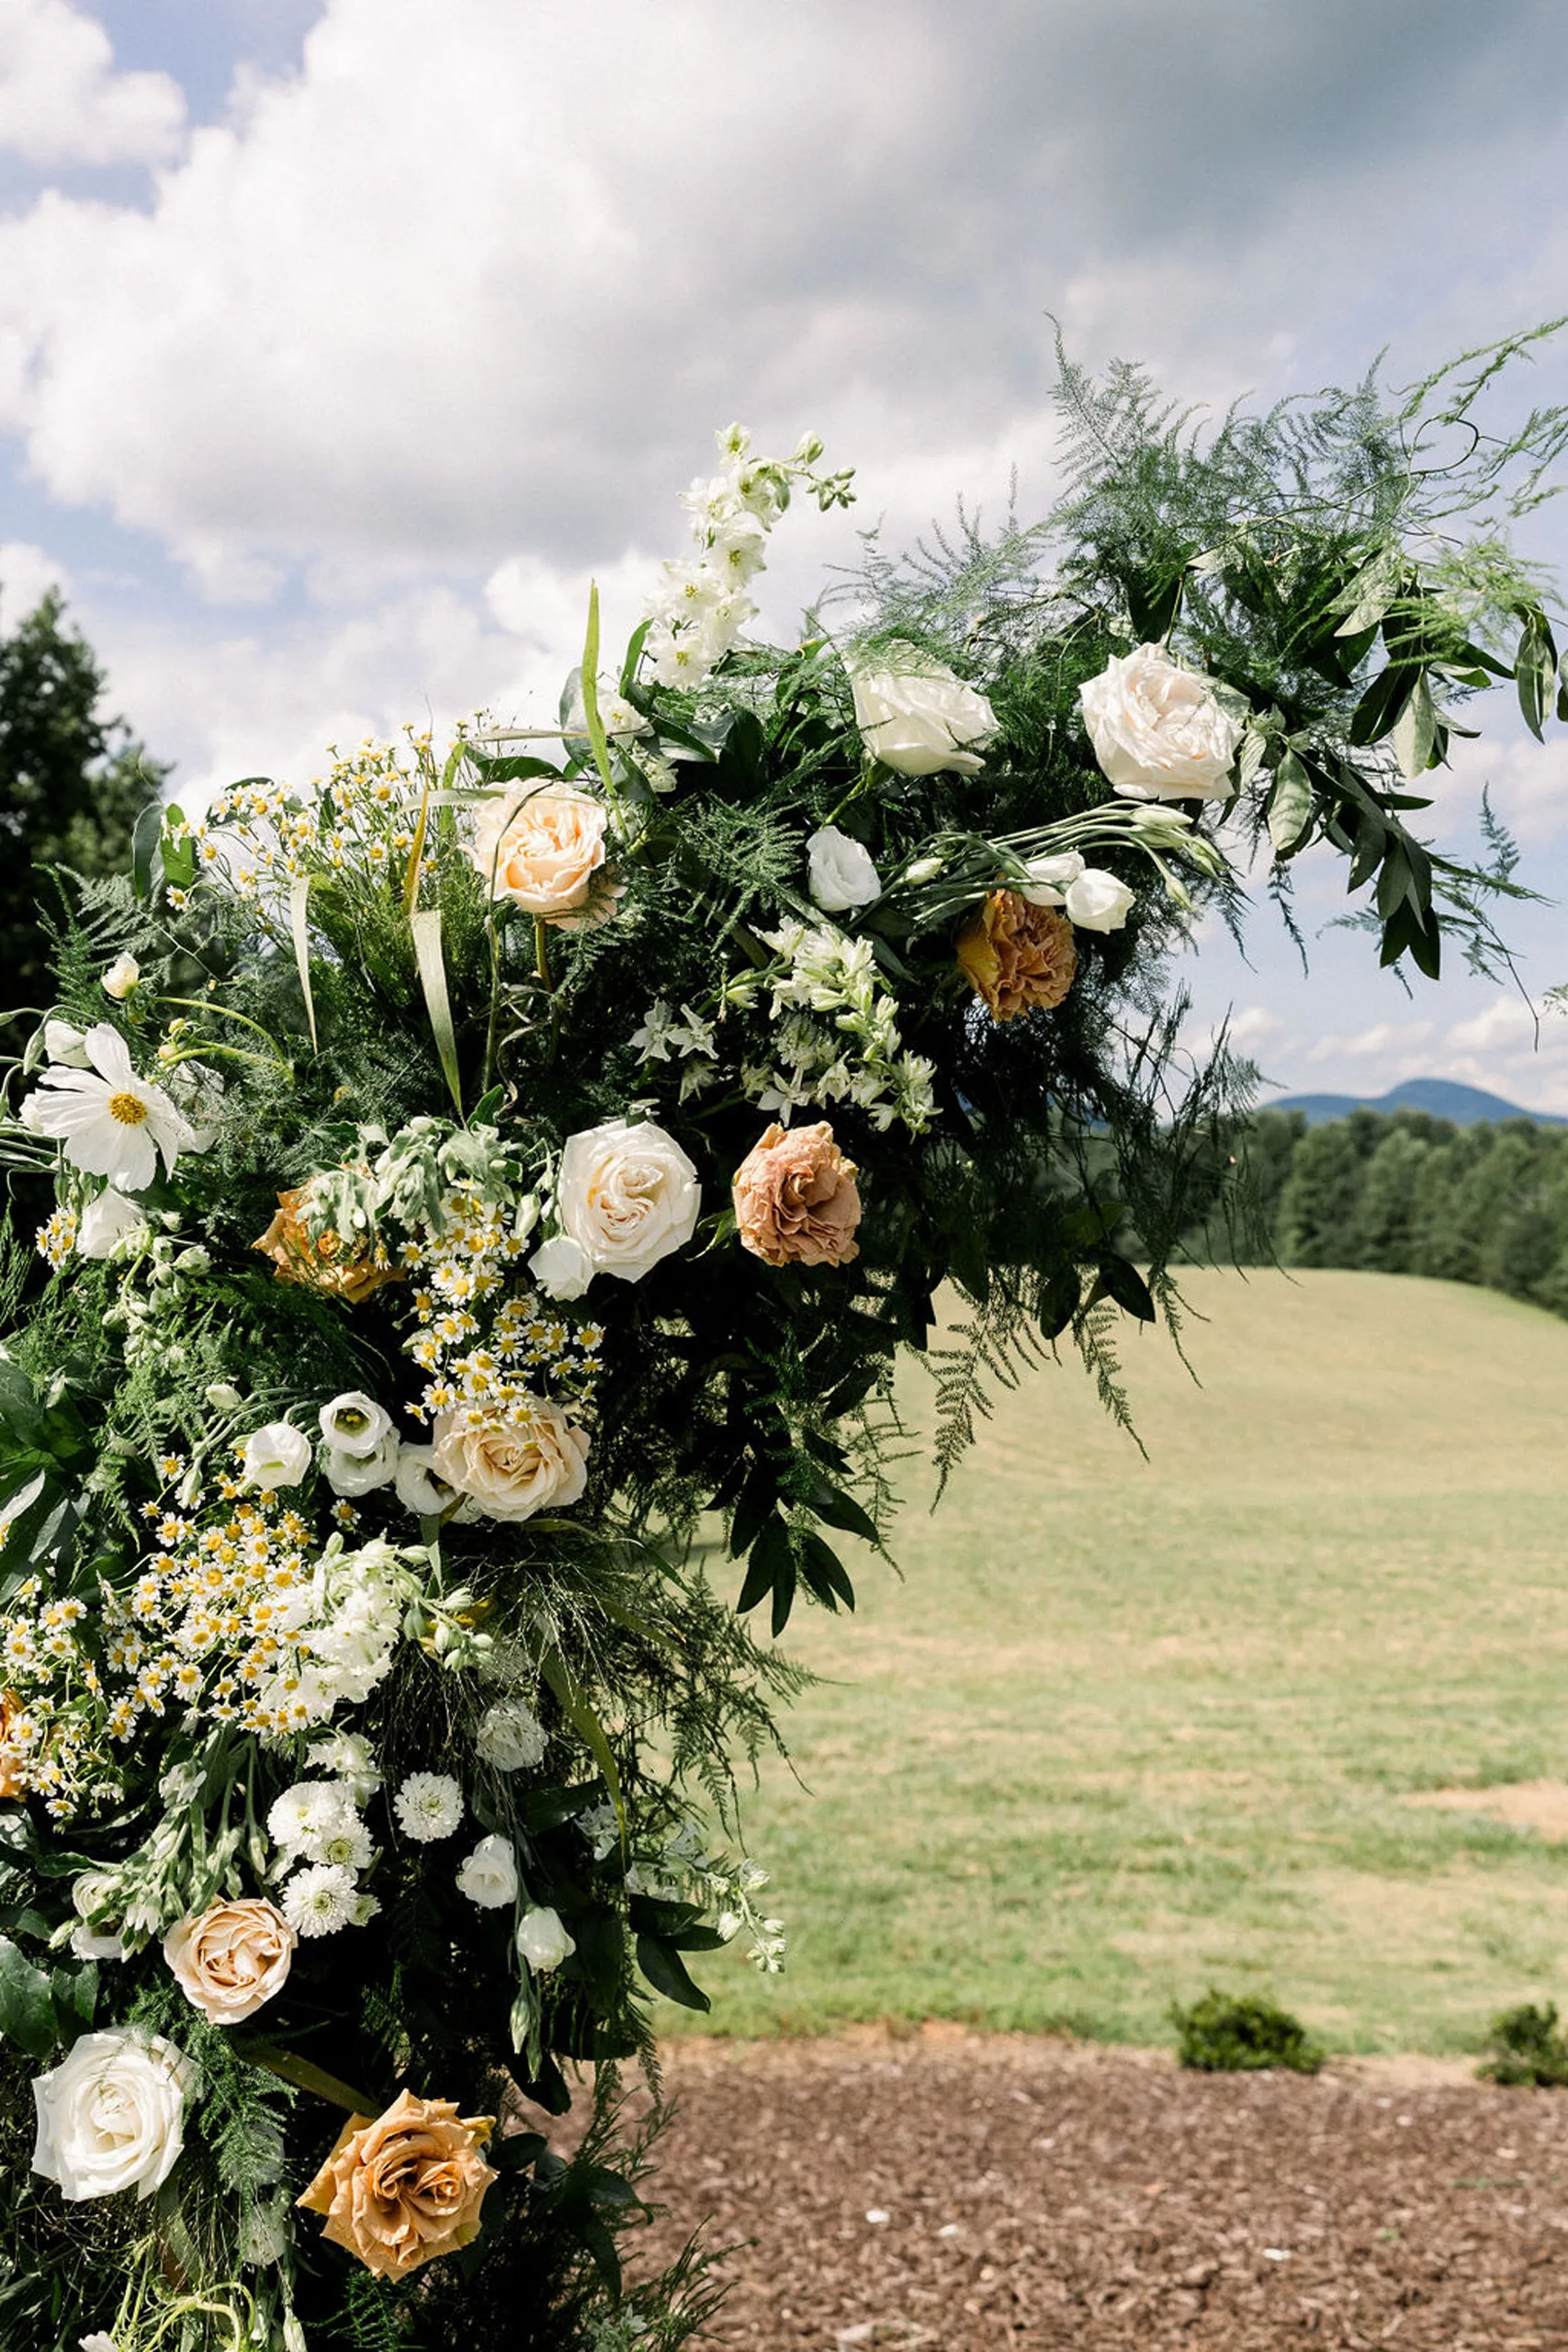 Details of a wedding arch with white and orange roses in an open field at a meadows at mossy creek wedding